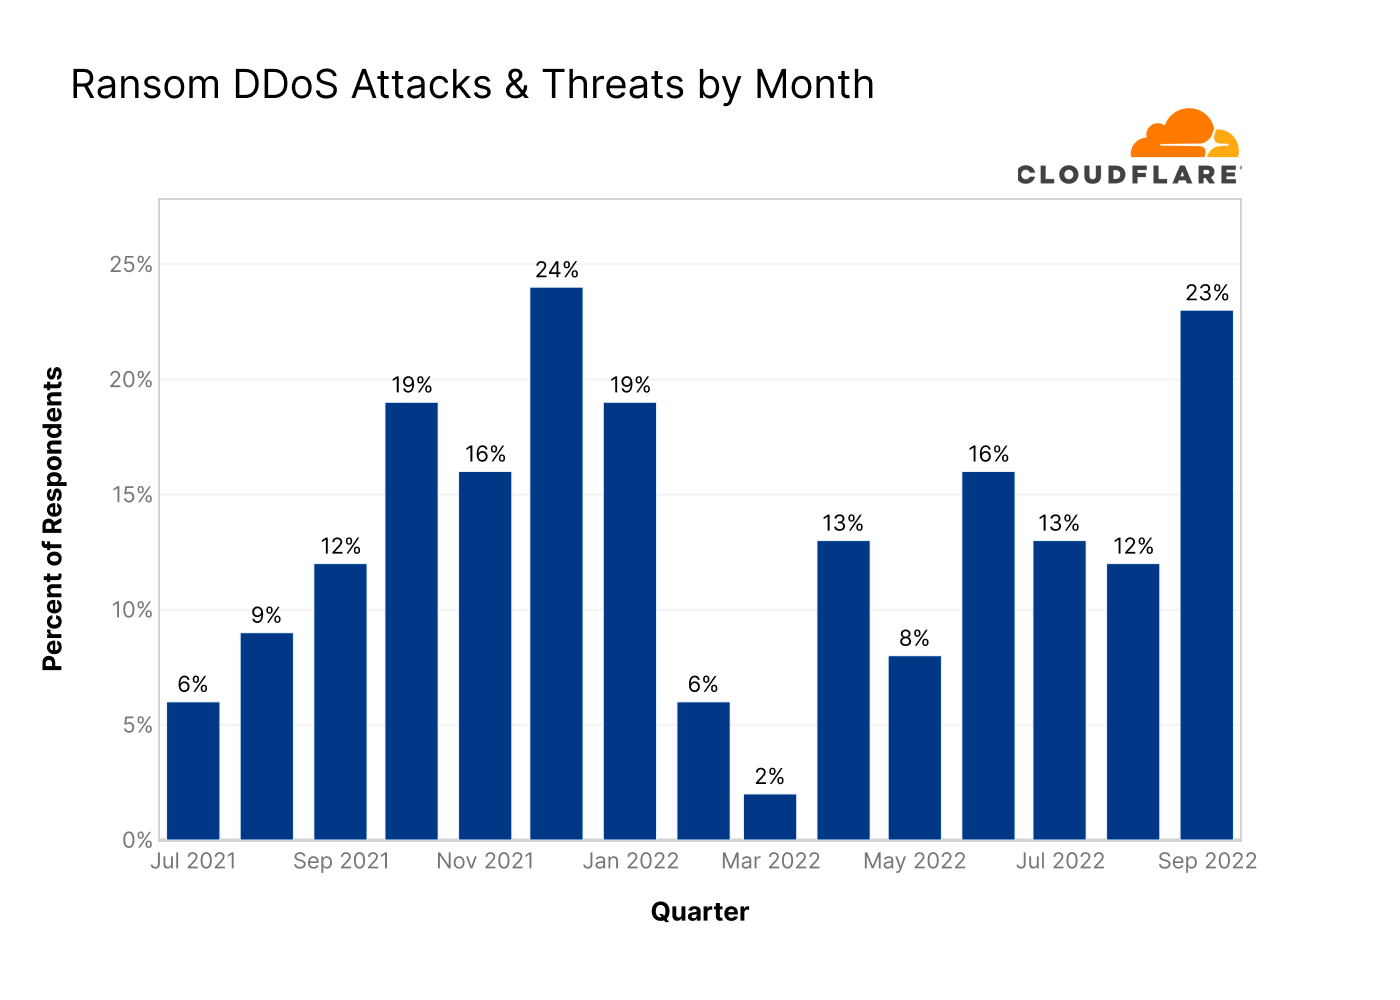 Graph of Ransom DDoS attacks by month